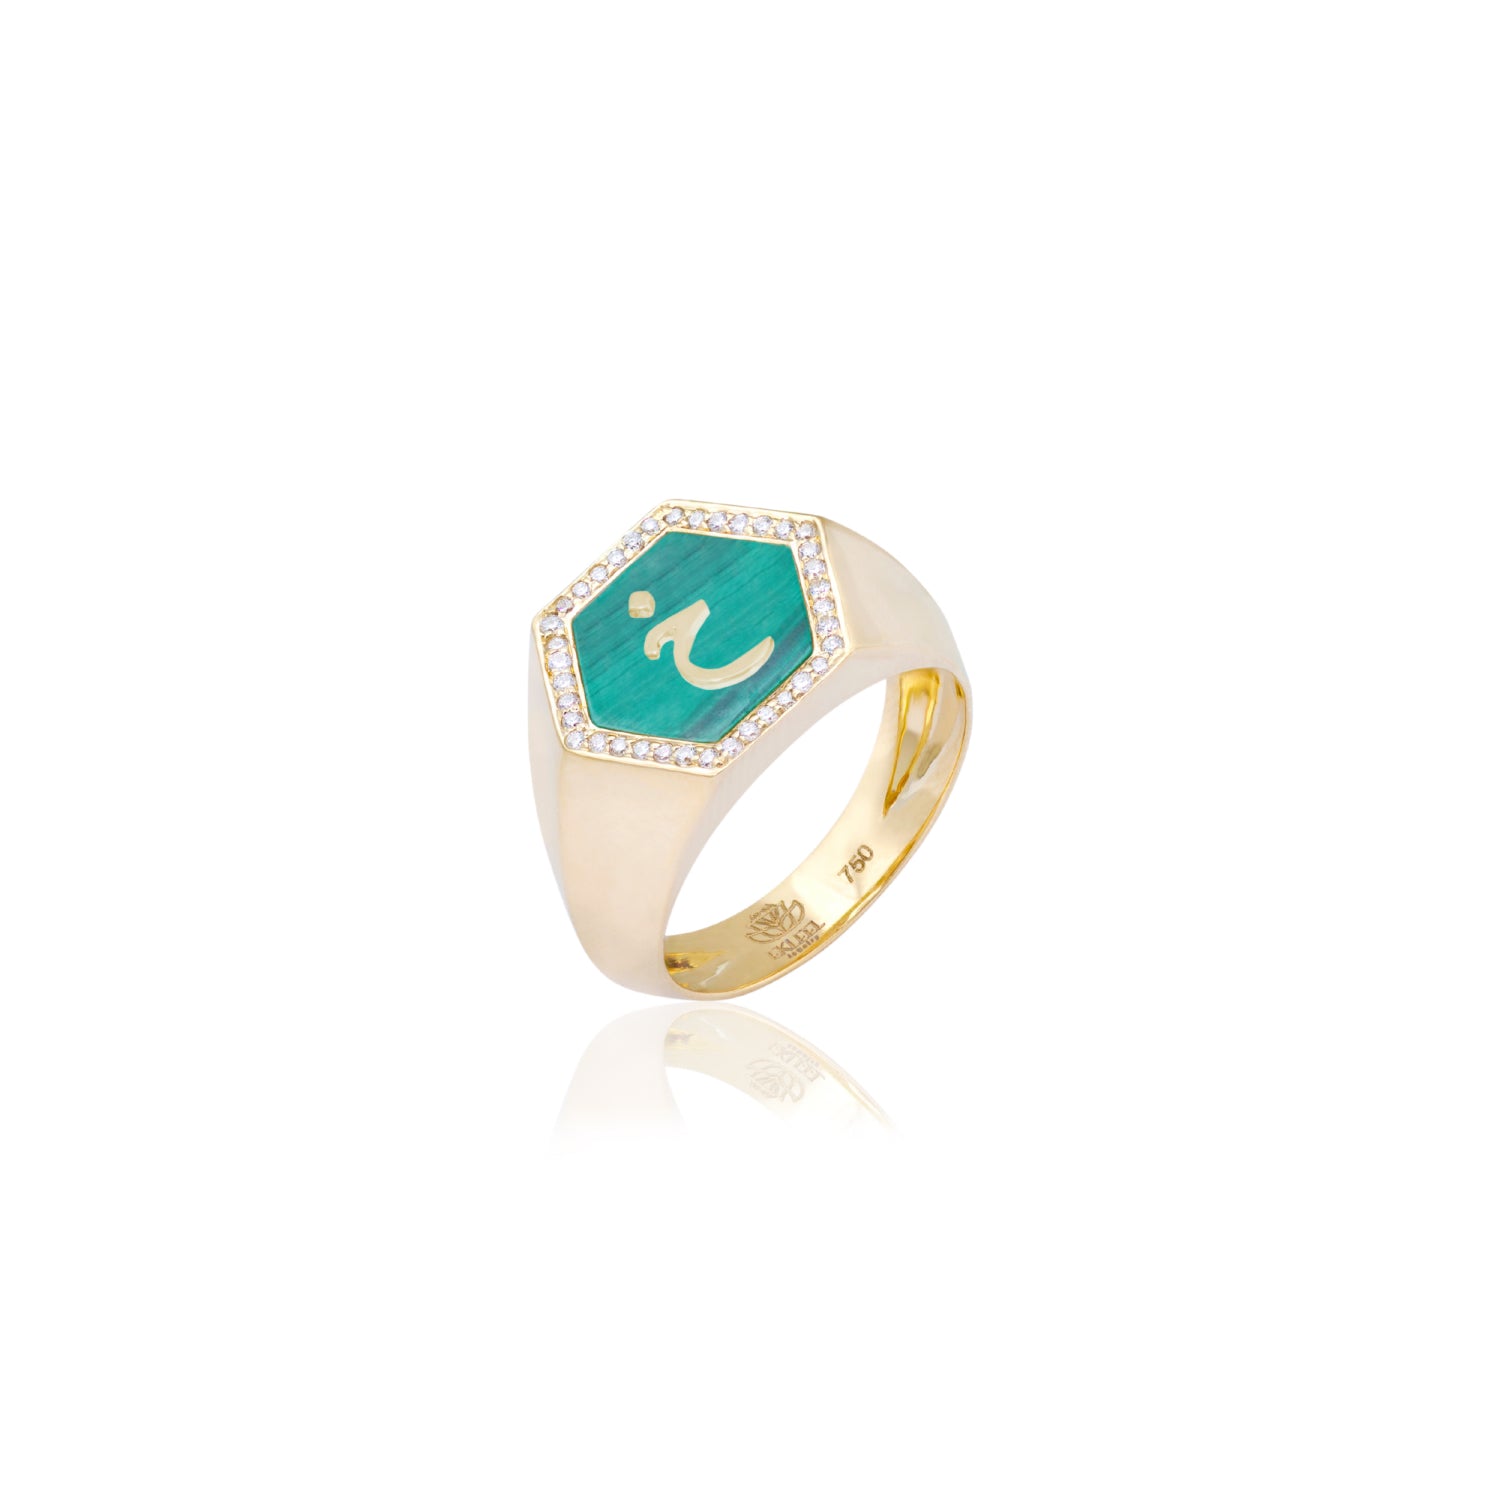 Qamoos 2.0 Letter خ Malachite and Diamond Signet Ring in Yellow Gold